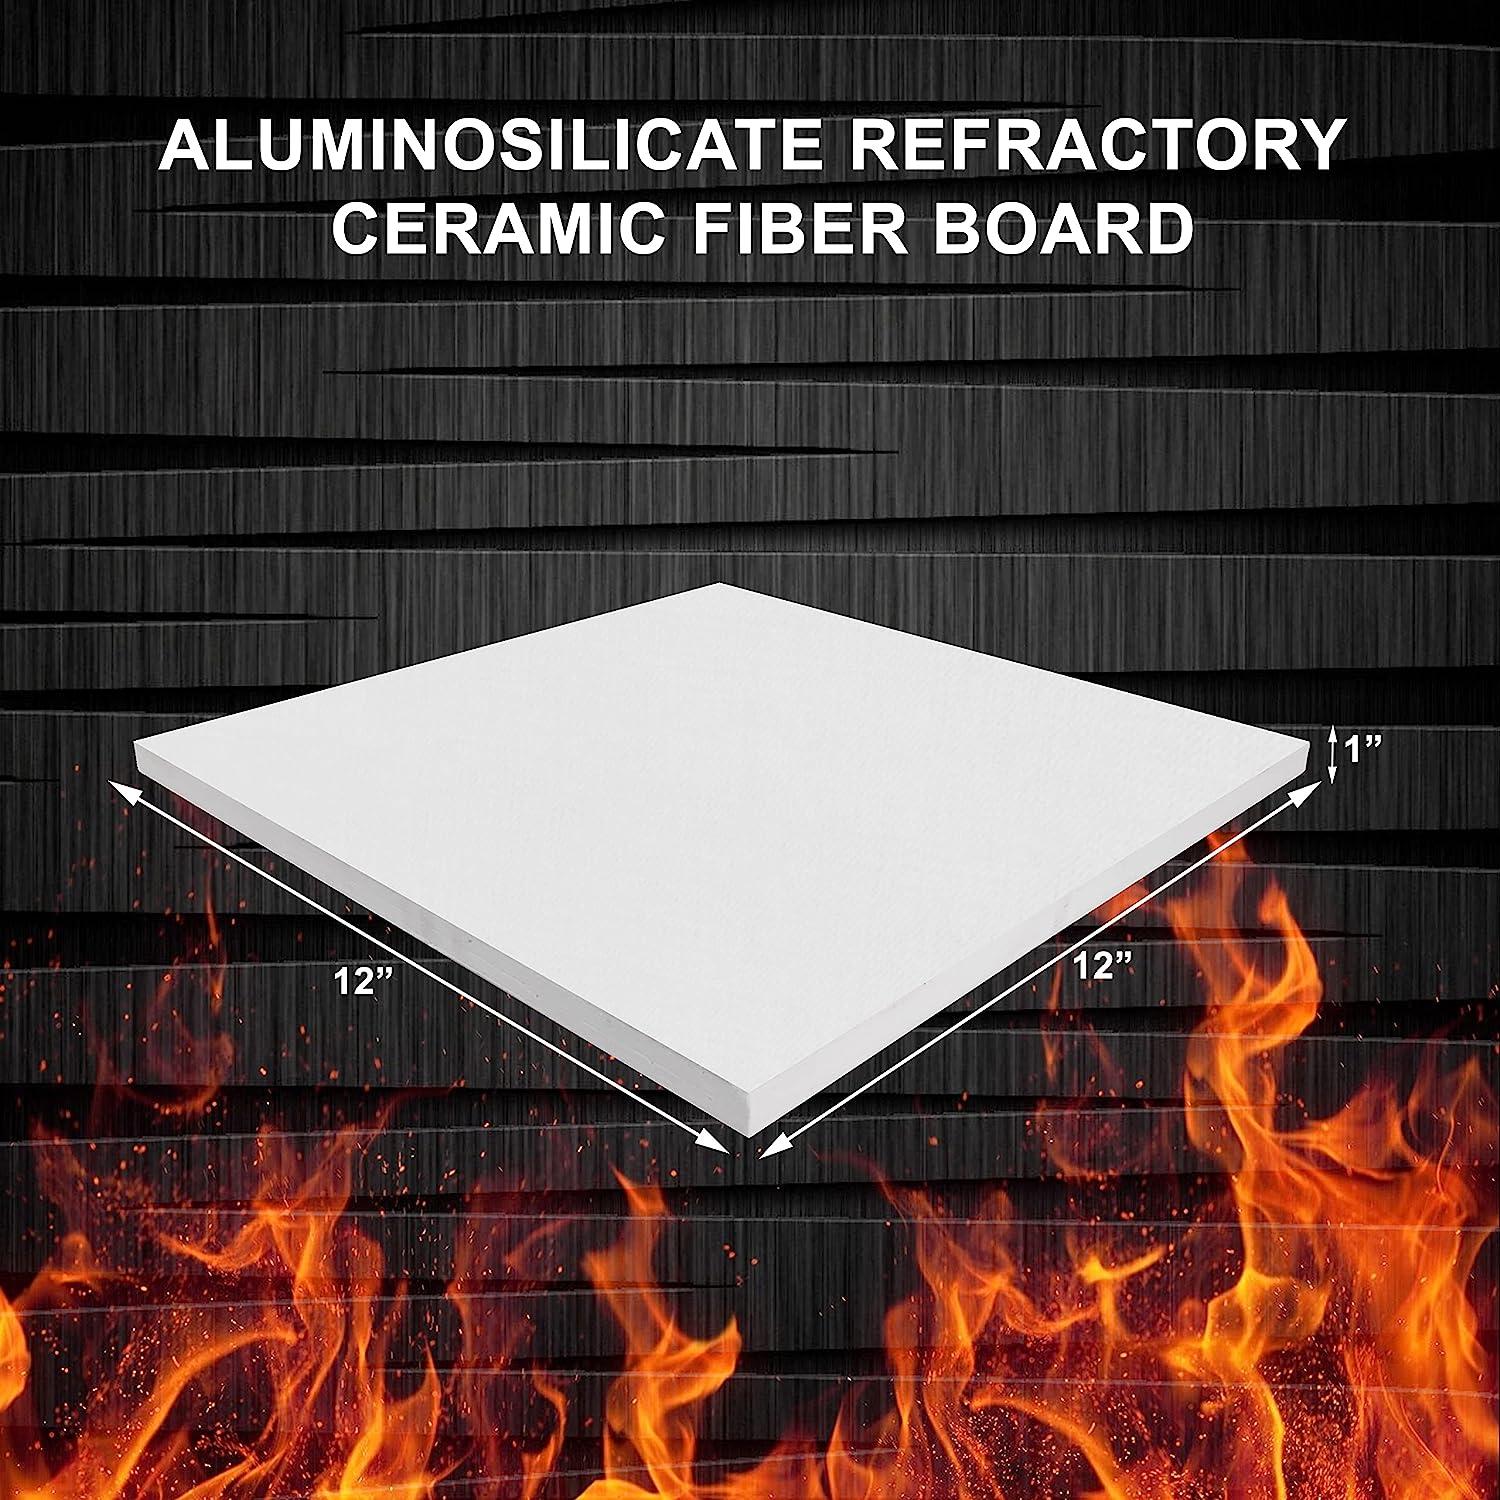 What ceramic fiberboard is more suitable for fireplace insulation?